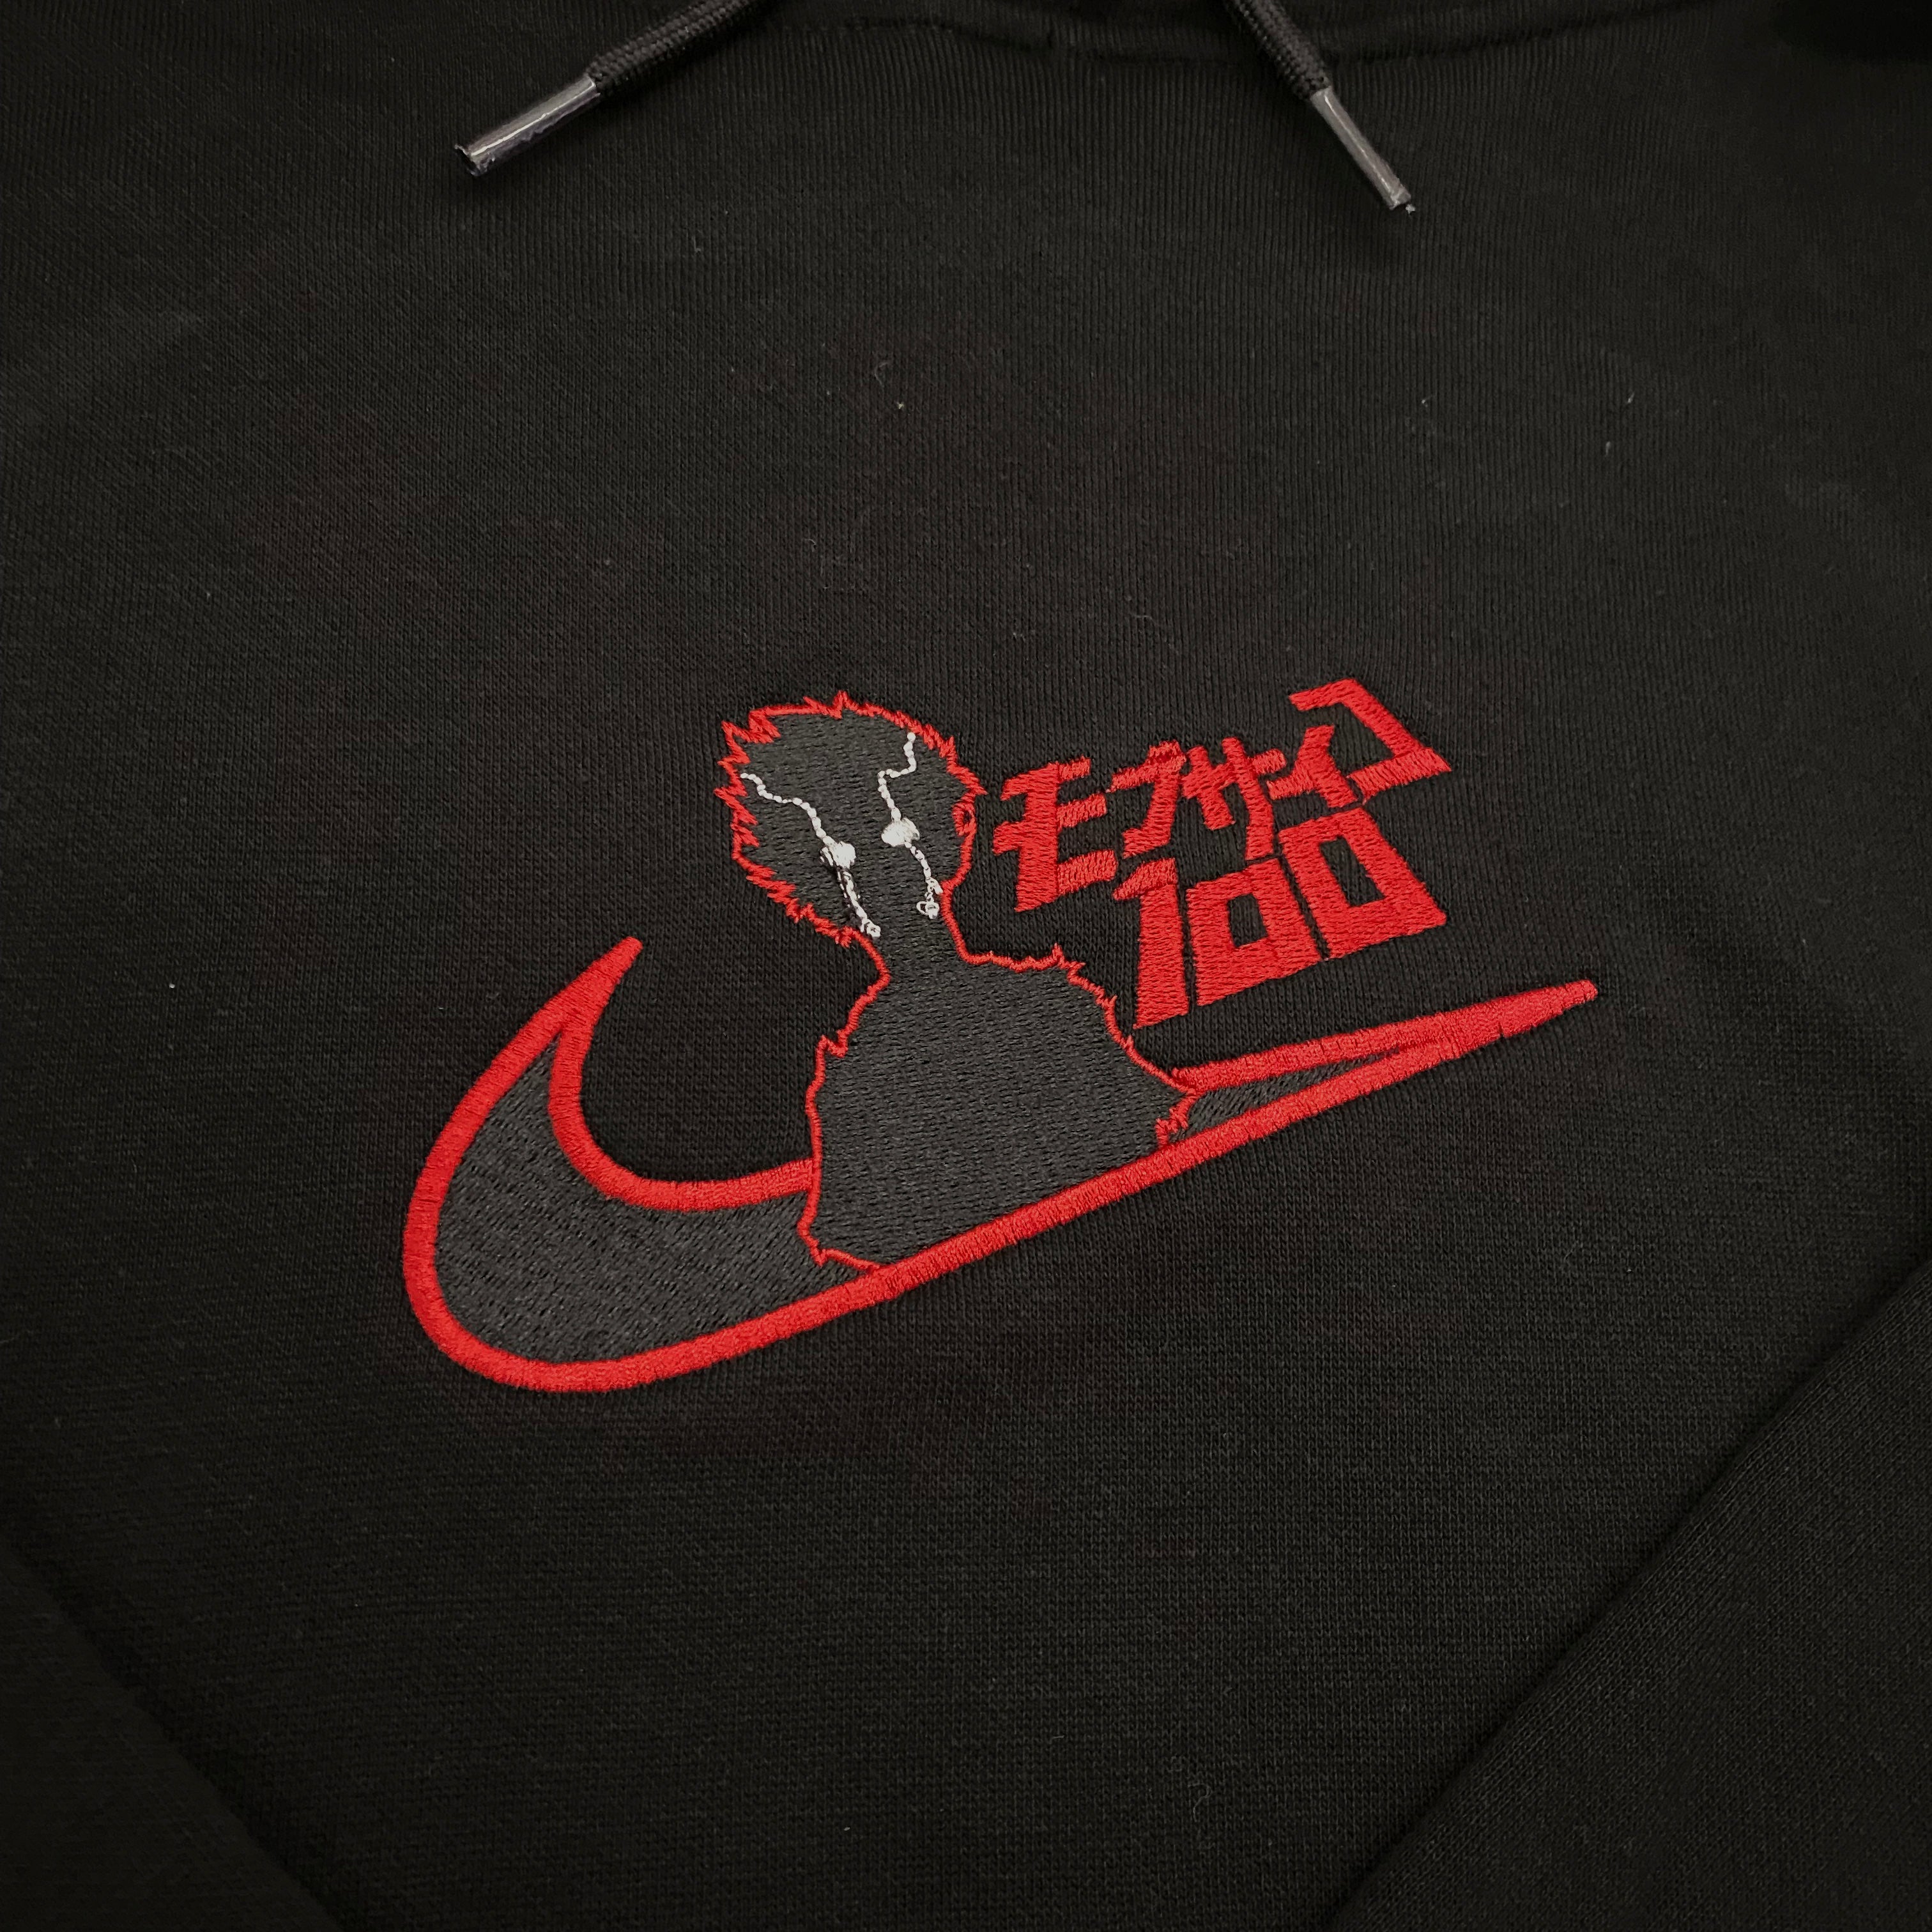 LIMITED MOB PSYCHO 100% RAGE EMBROIDERED HOODIE